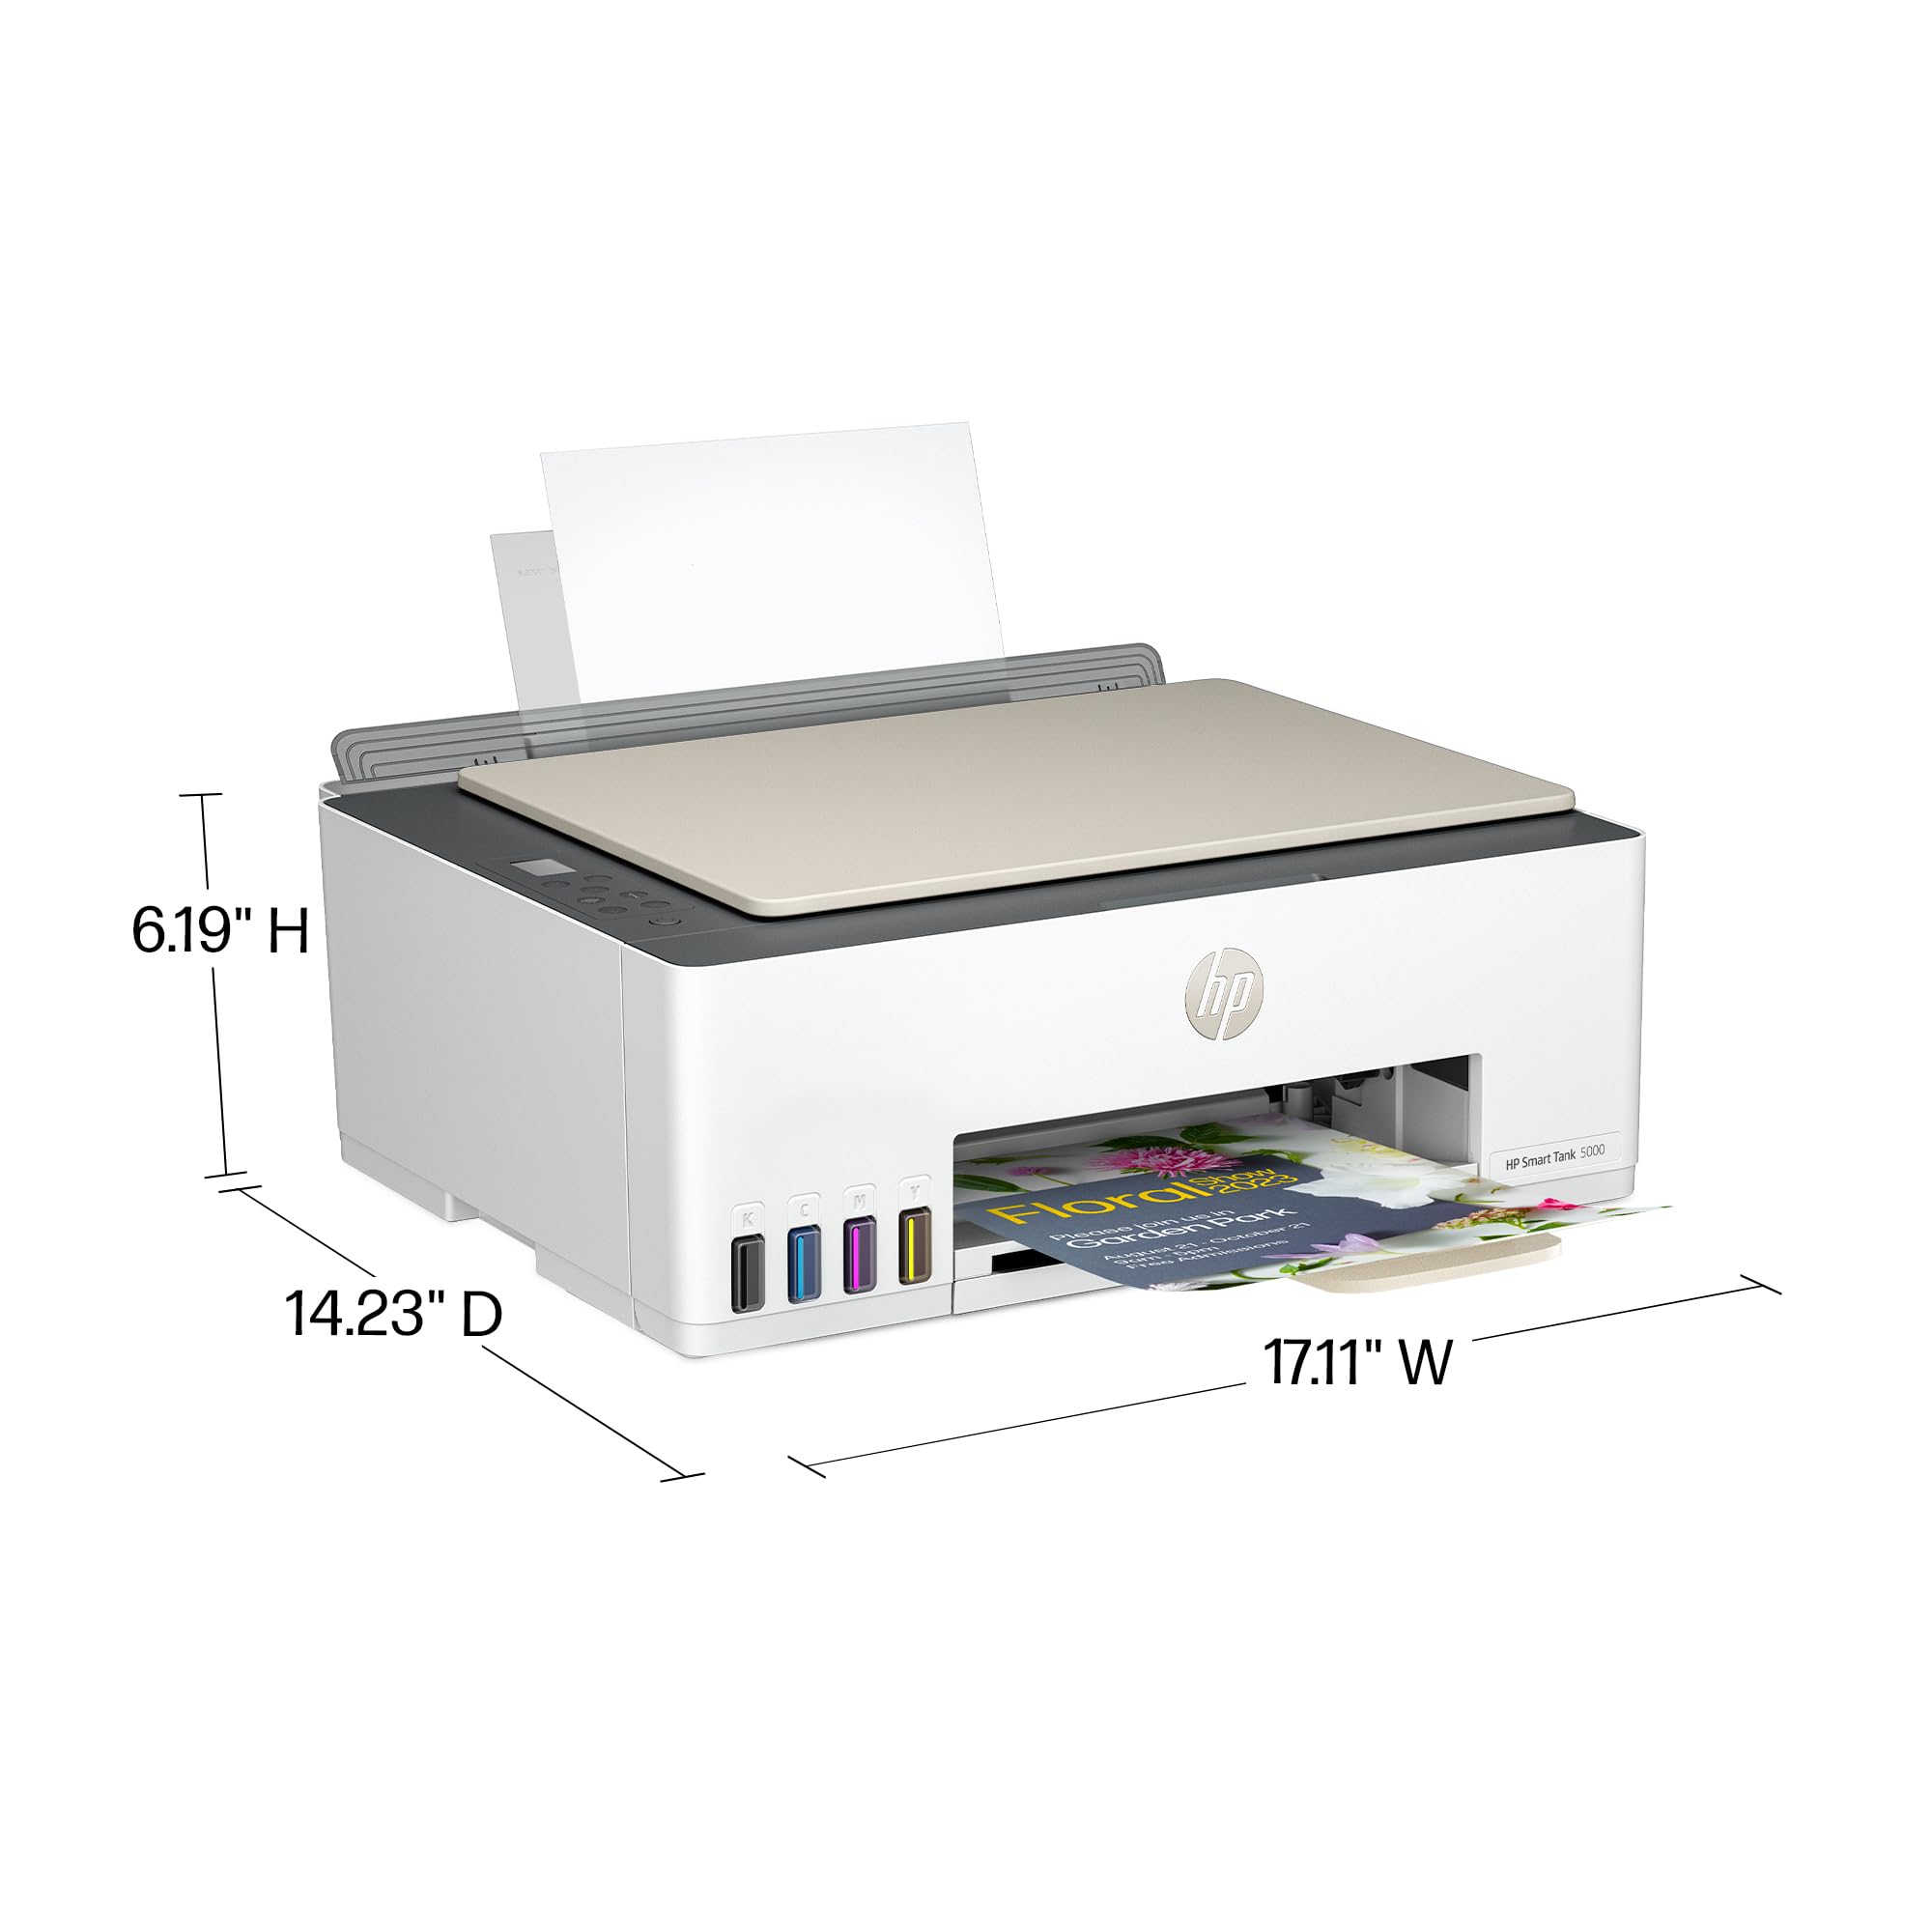 HP Smart Tank 5000 Wireless All-in-One Ink Tank Printer with up to 2 years of ink included, mobile print, scan, copy, white, 17.11 x 14.23 x 6.19